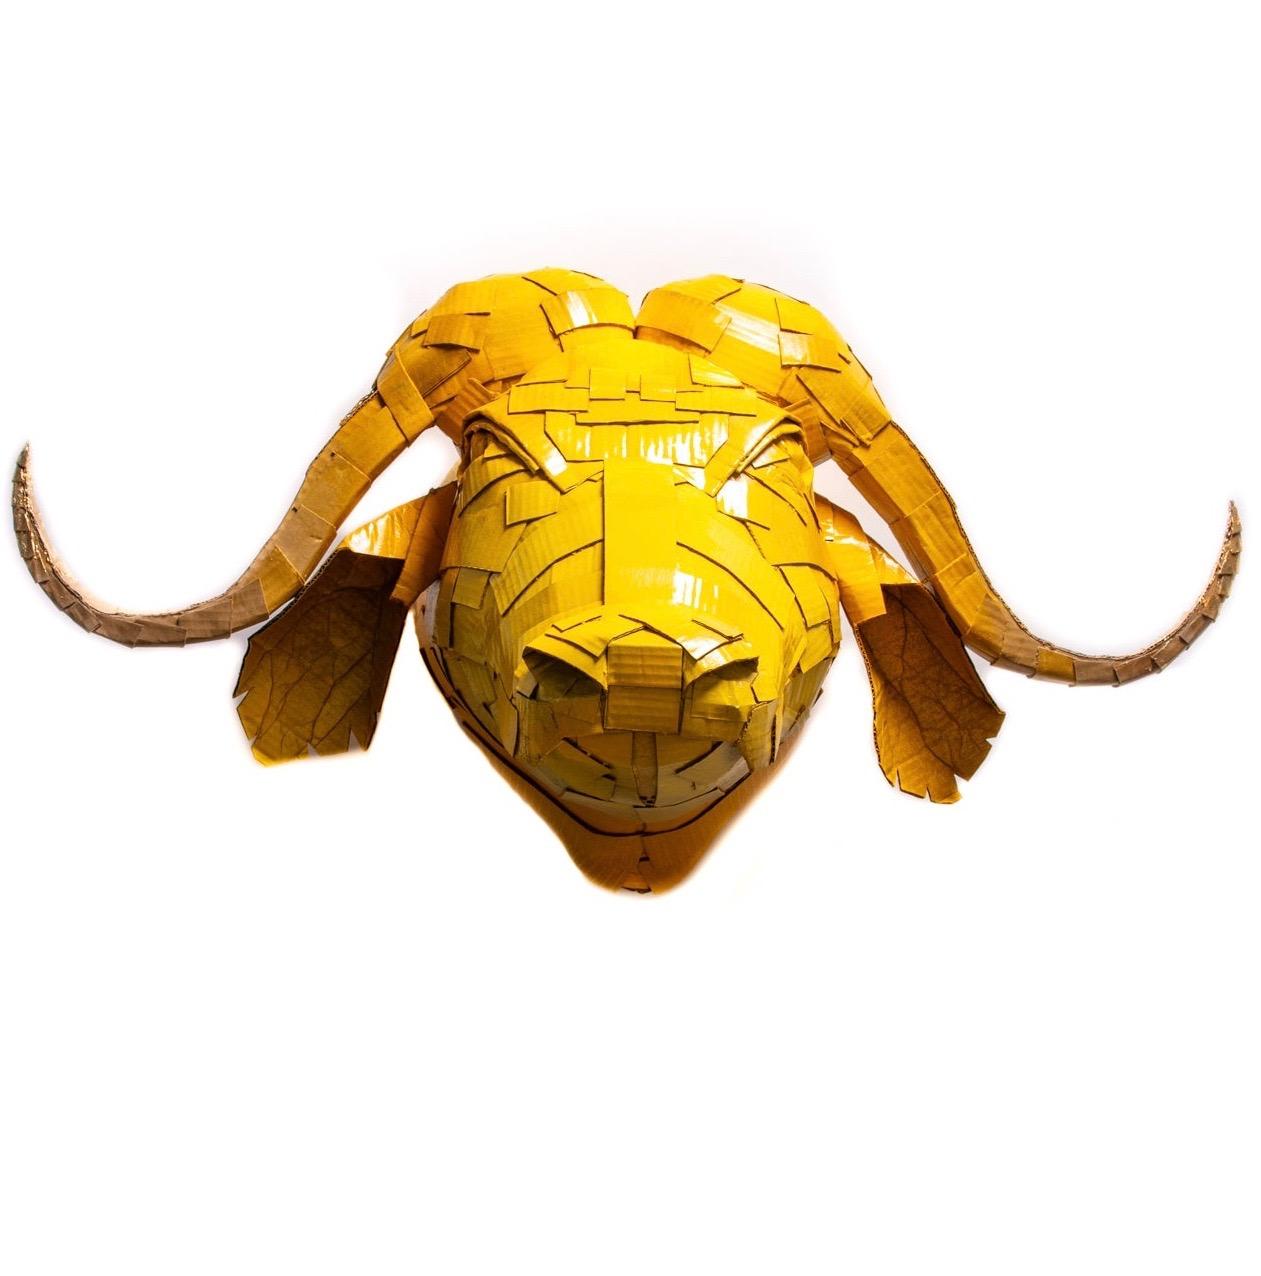 Buffalo #2 in Butterscotch Yellow with Gold Leaf Detail